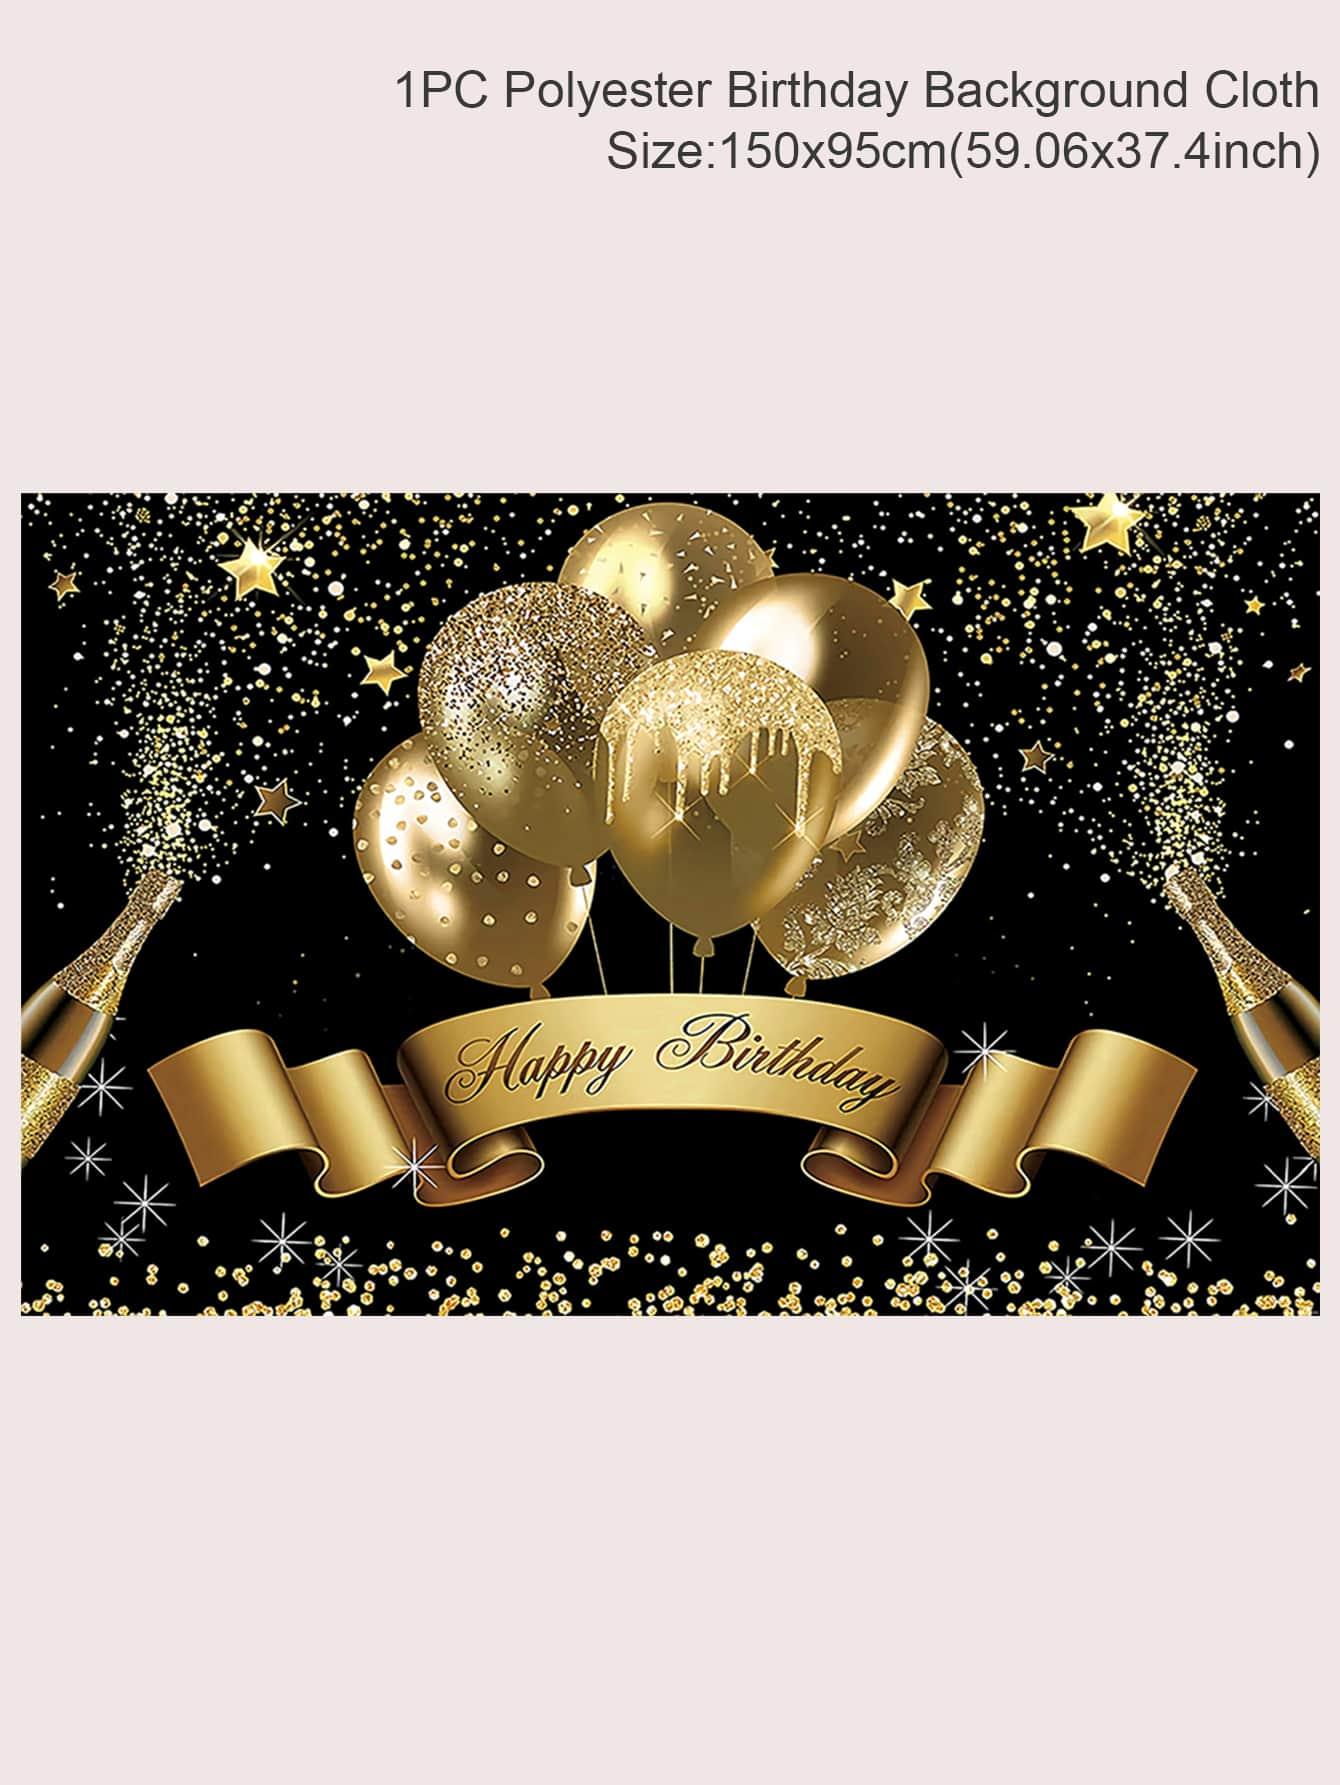 1pc Black Gold Balloon Birthday Party Backdrop Decorative Background Cloth - If you say i do